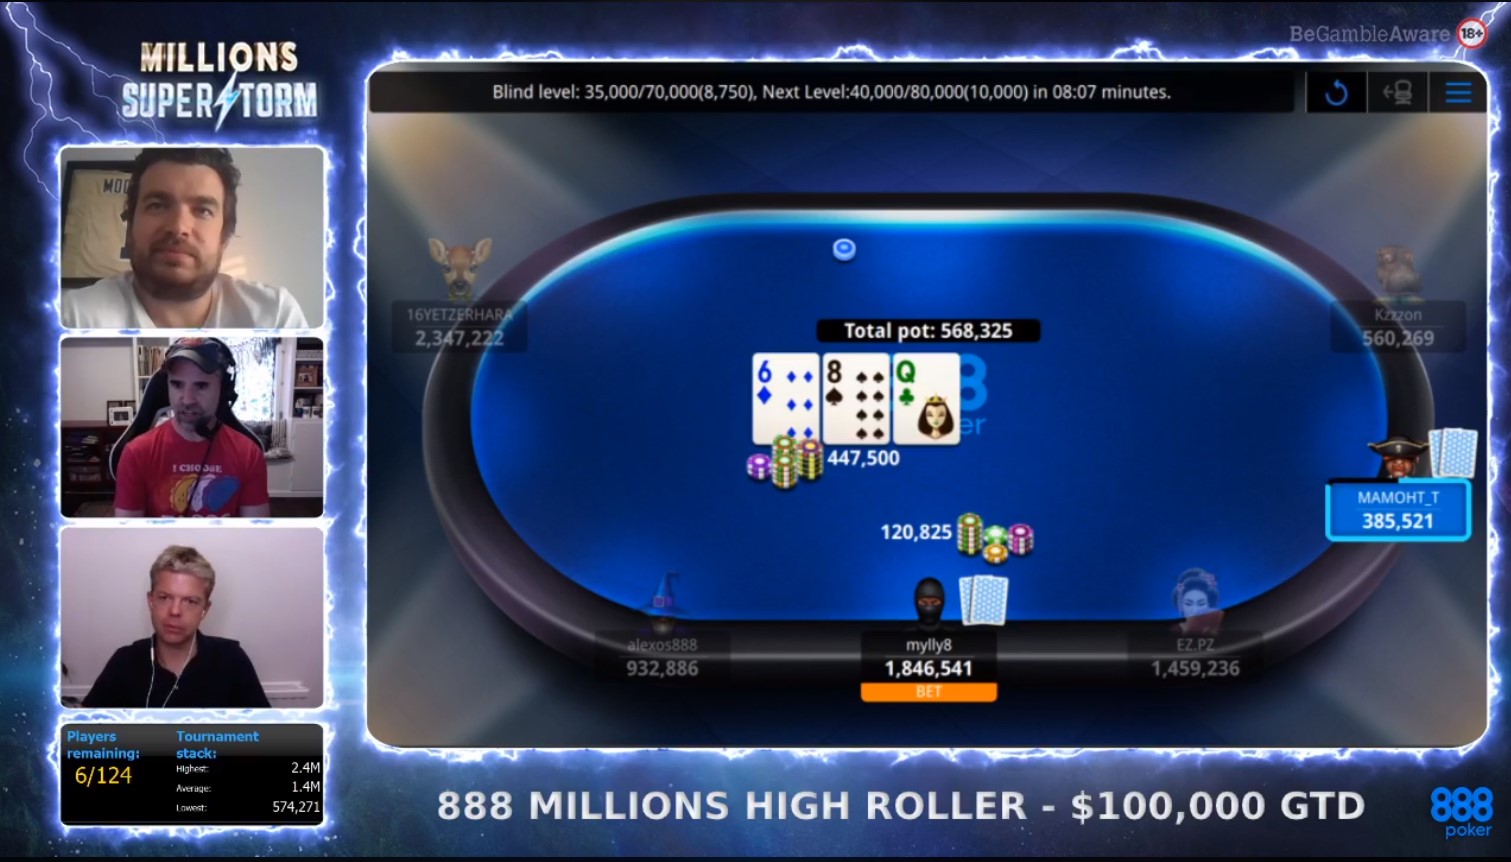 Moorman High Roller Final Table Results